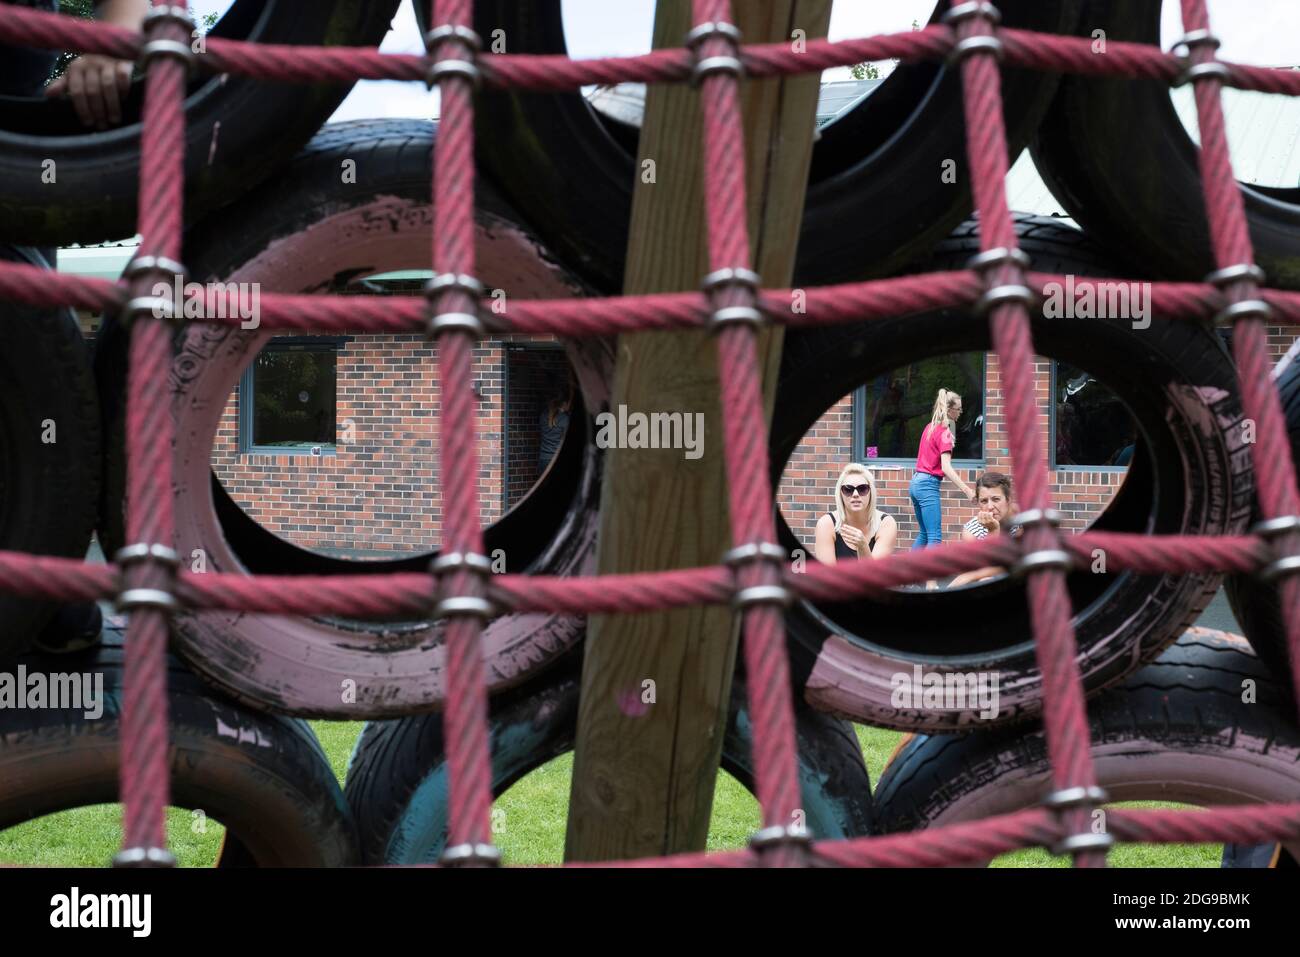 Knottingley, UK – 04 Aug 2017 – Parents watch children play on the tyre climbing frame at The Addy, The Old Quarry Adventure Playground at Warwick Est Stock Photo